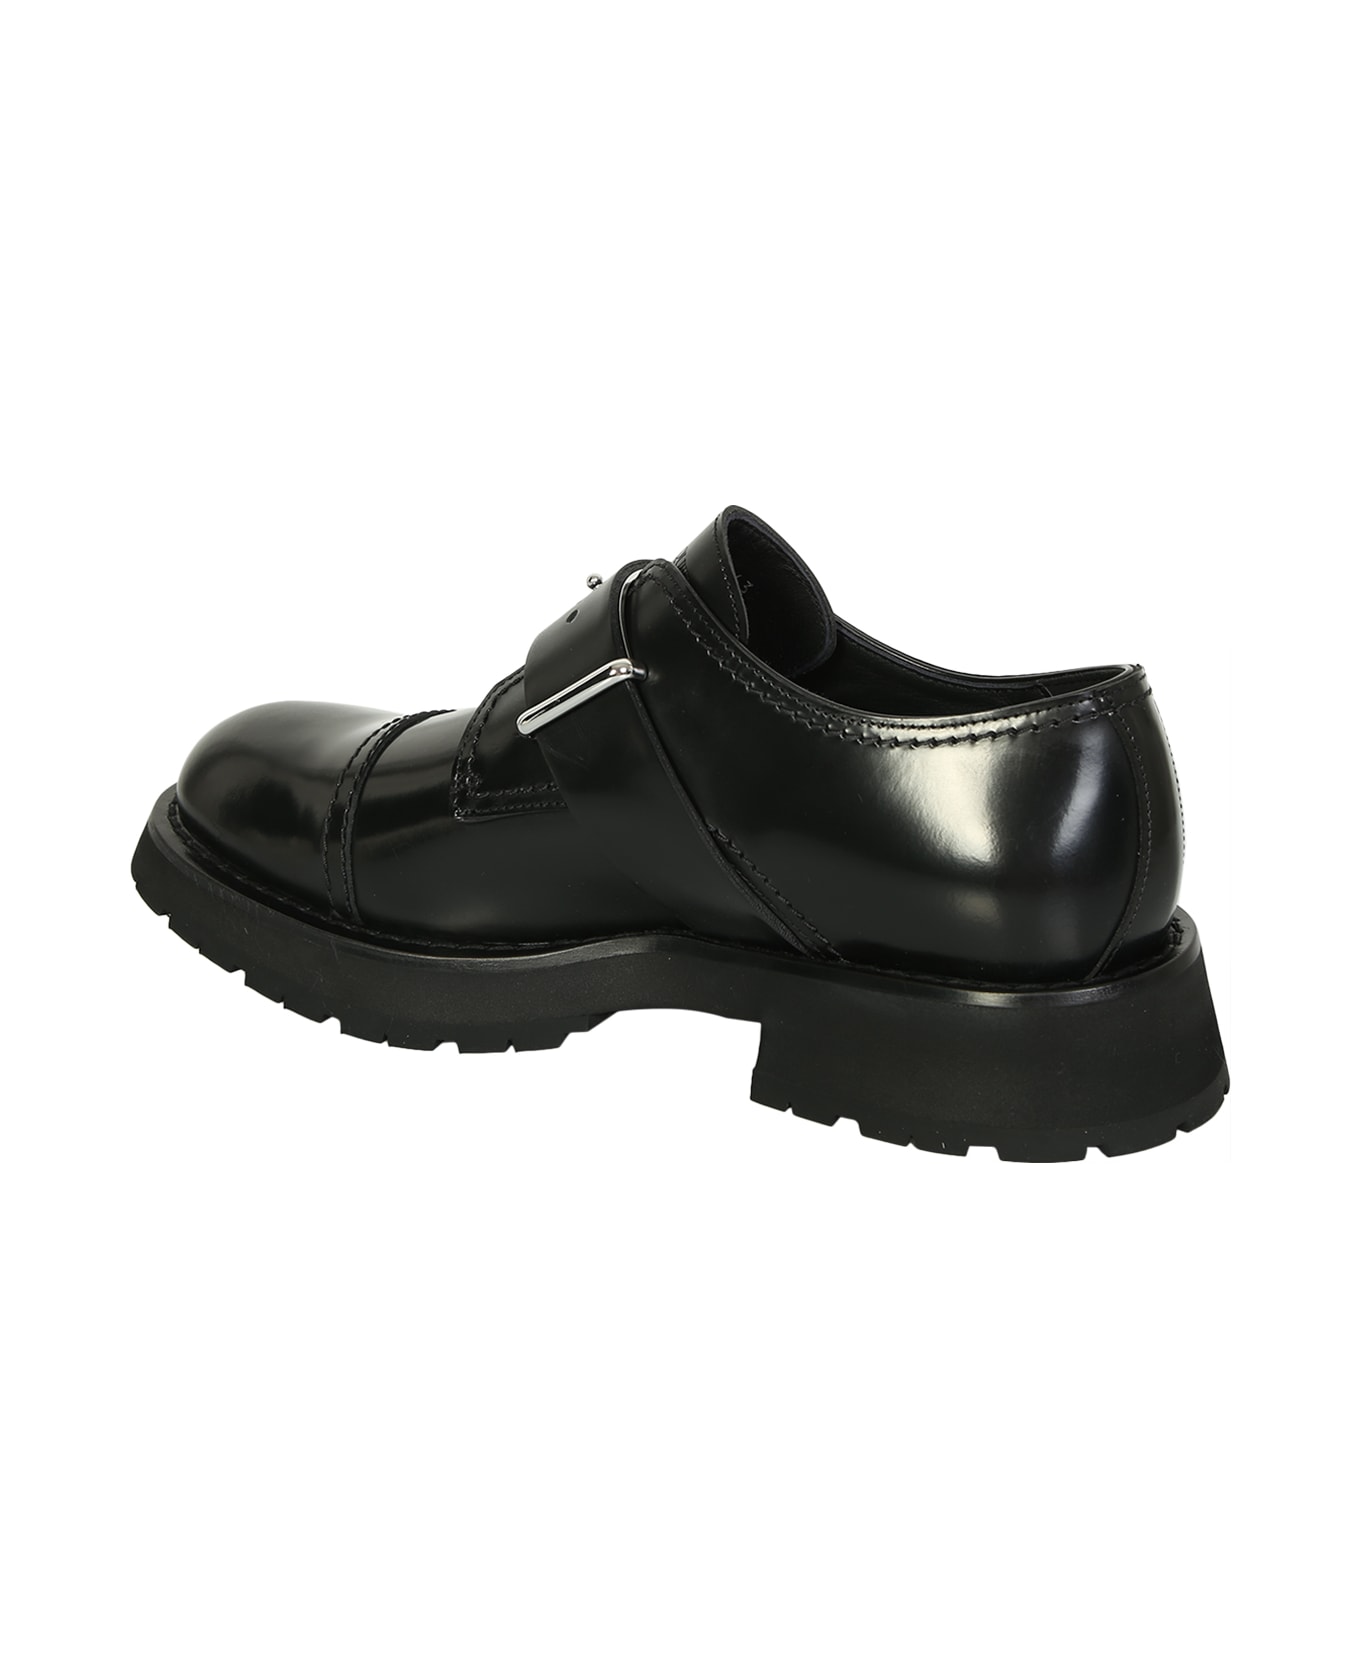 Alexander McQueen Monks Shoes With Buckle - Black